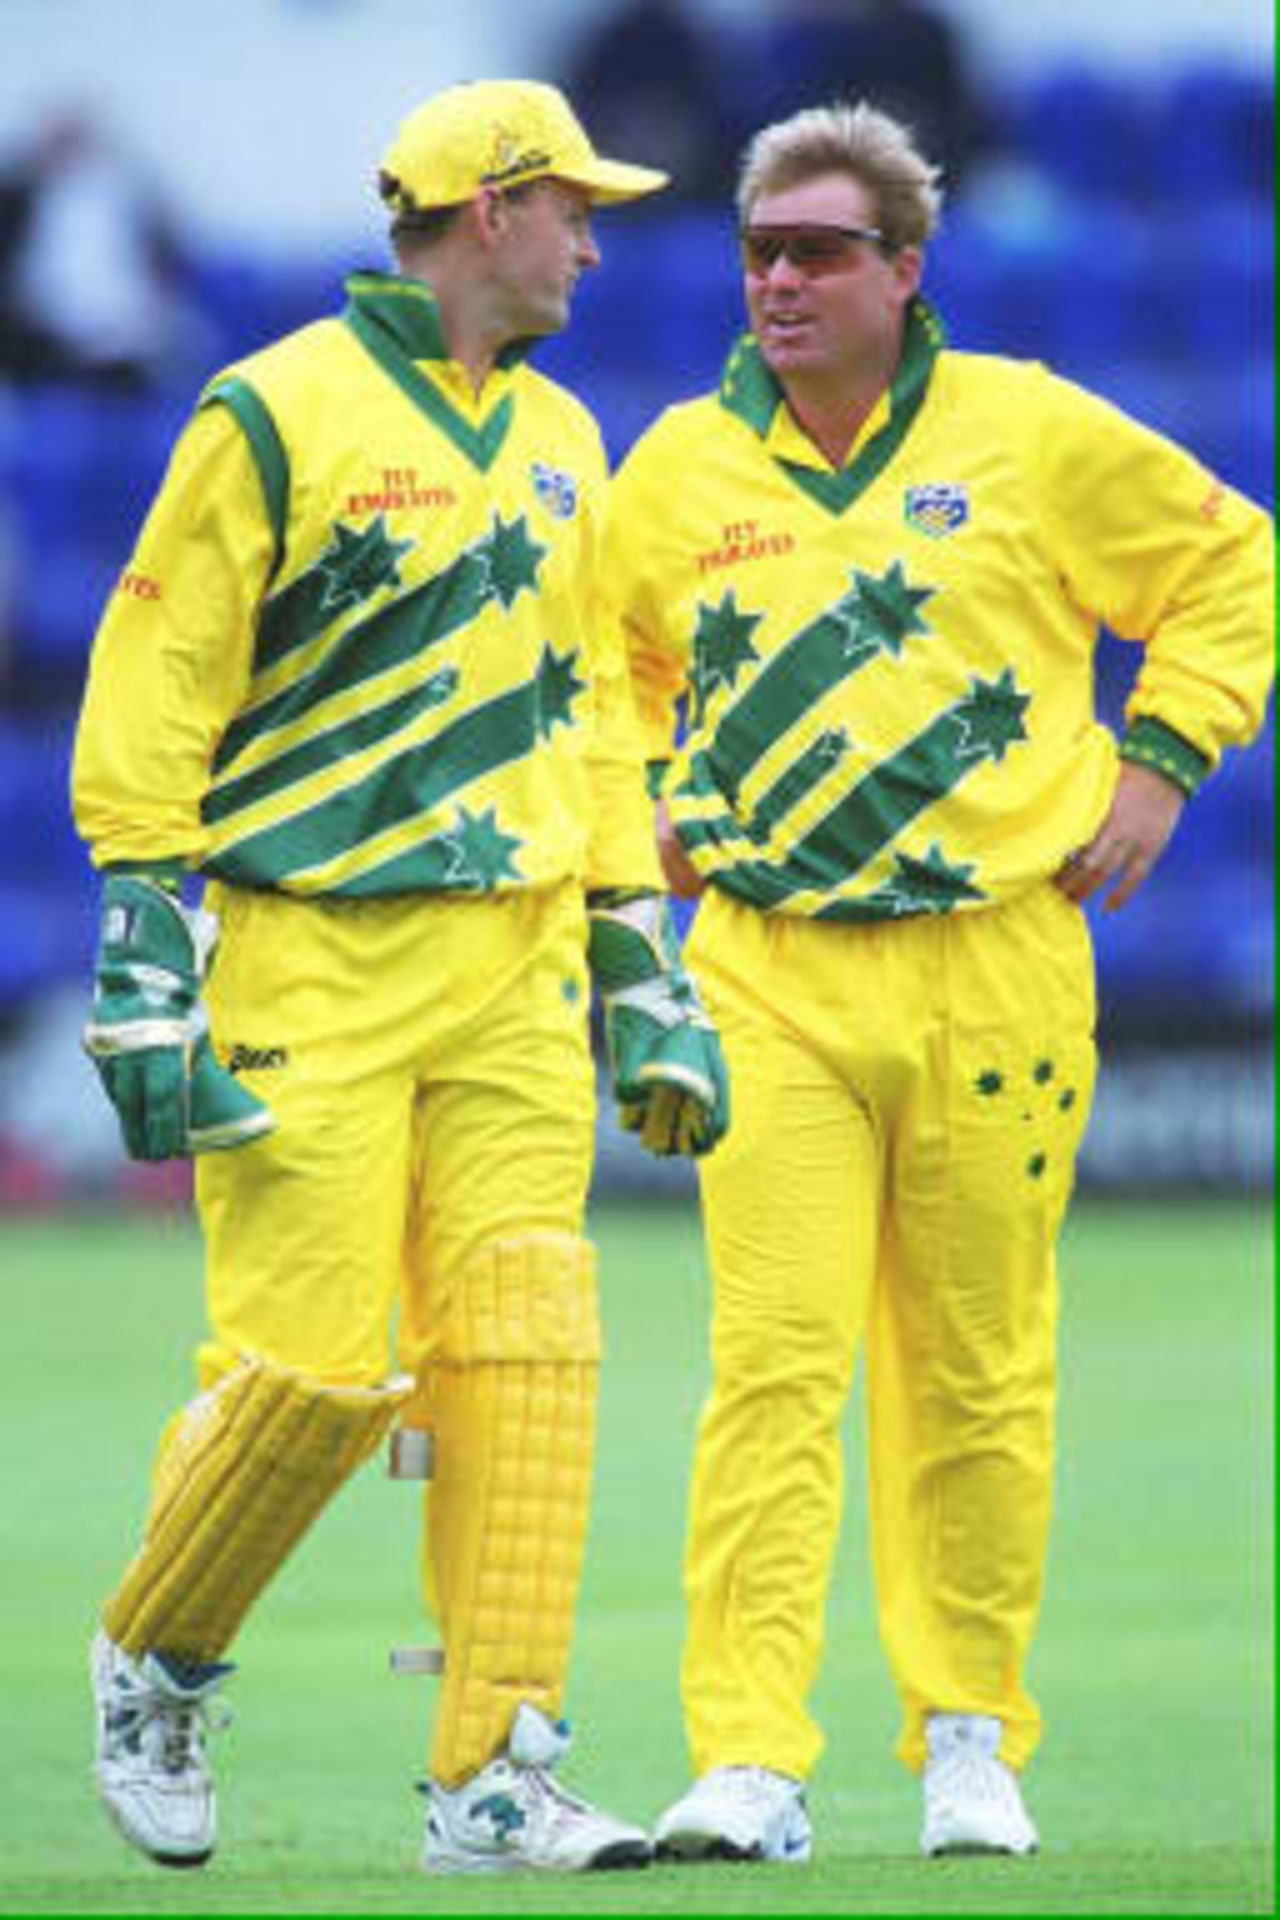 Shane Warne and Adam Gilchrist chat  - World Cup warm-up game, Australia v Glamorgan in Cardiff, 08 May 1999.